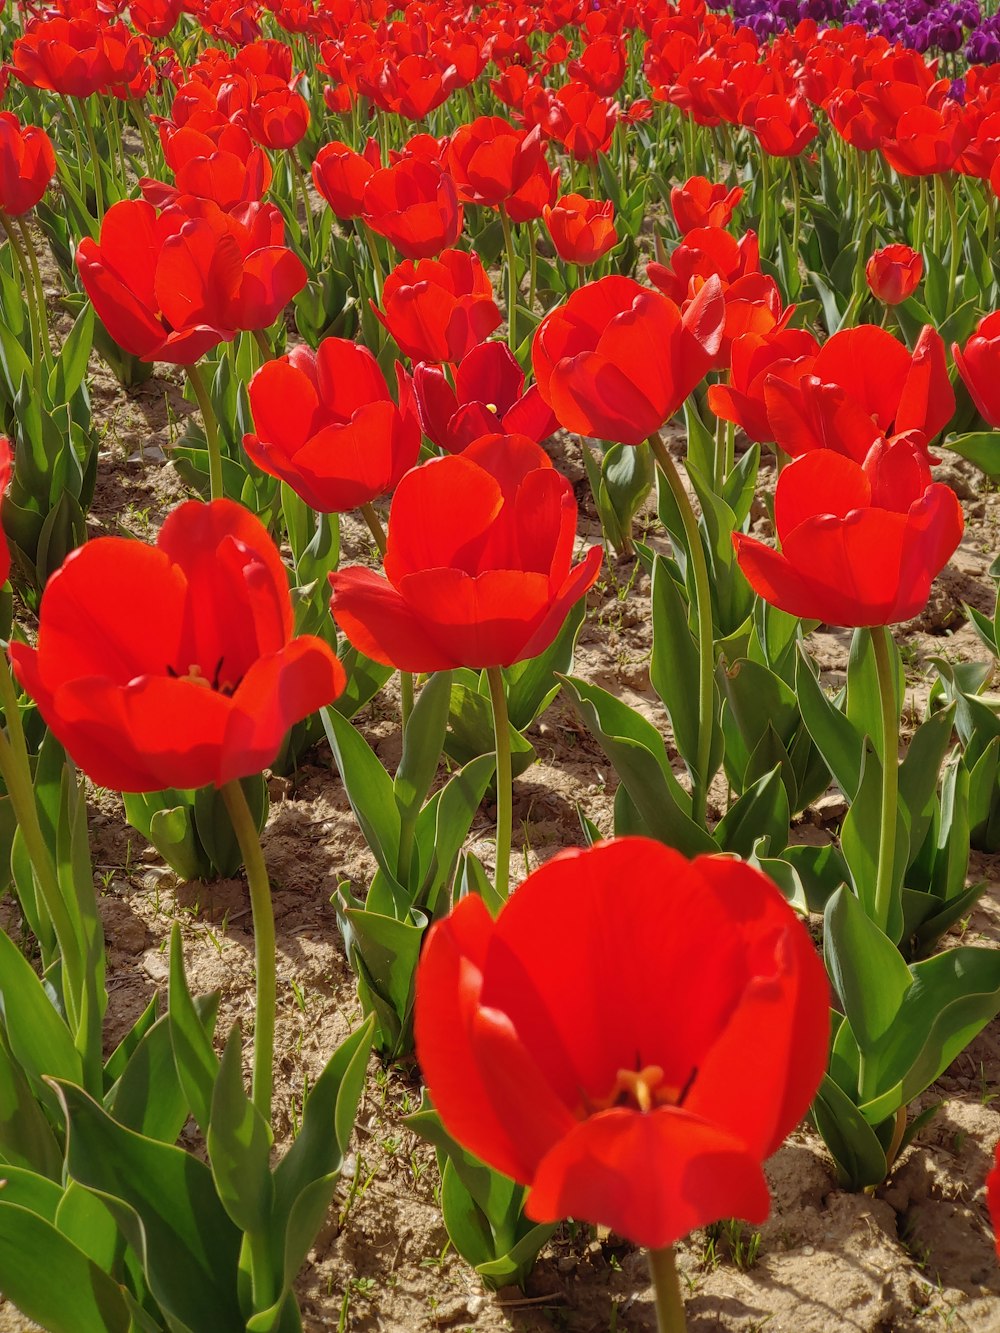 a field full of red flowers with purple flowers in the background